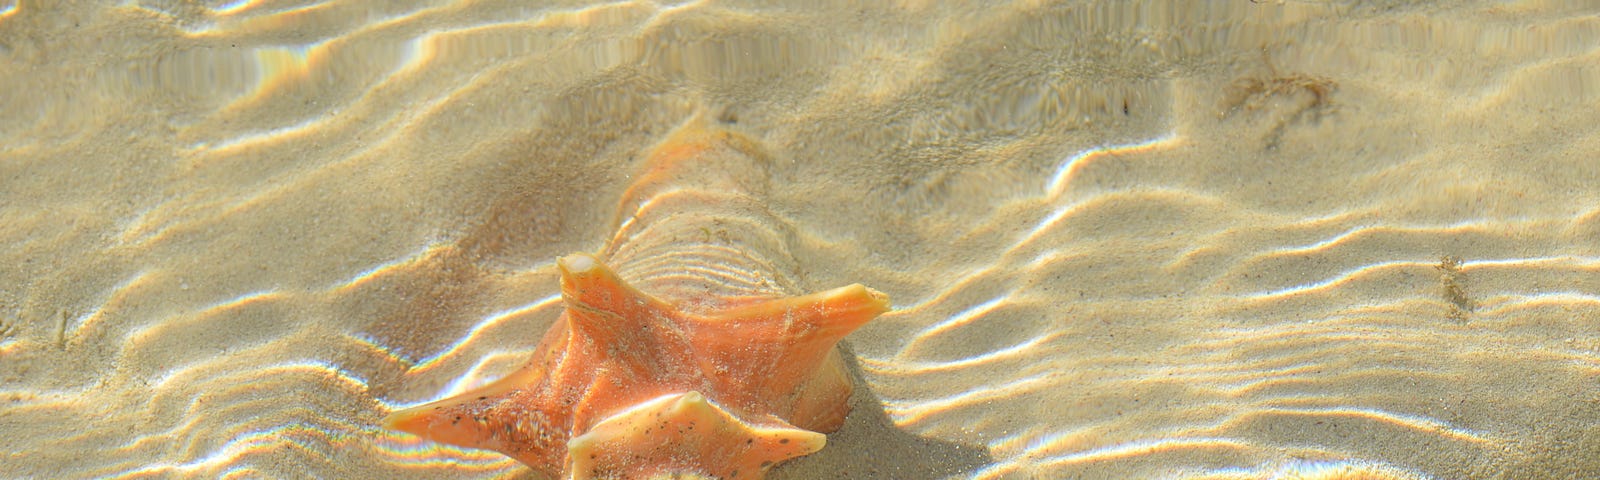 Large pink conch shell lying in the sand in shallow ocean waters, with reflections of the gentle waves.